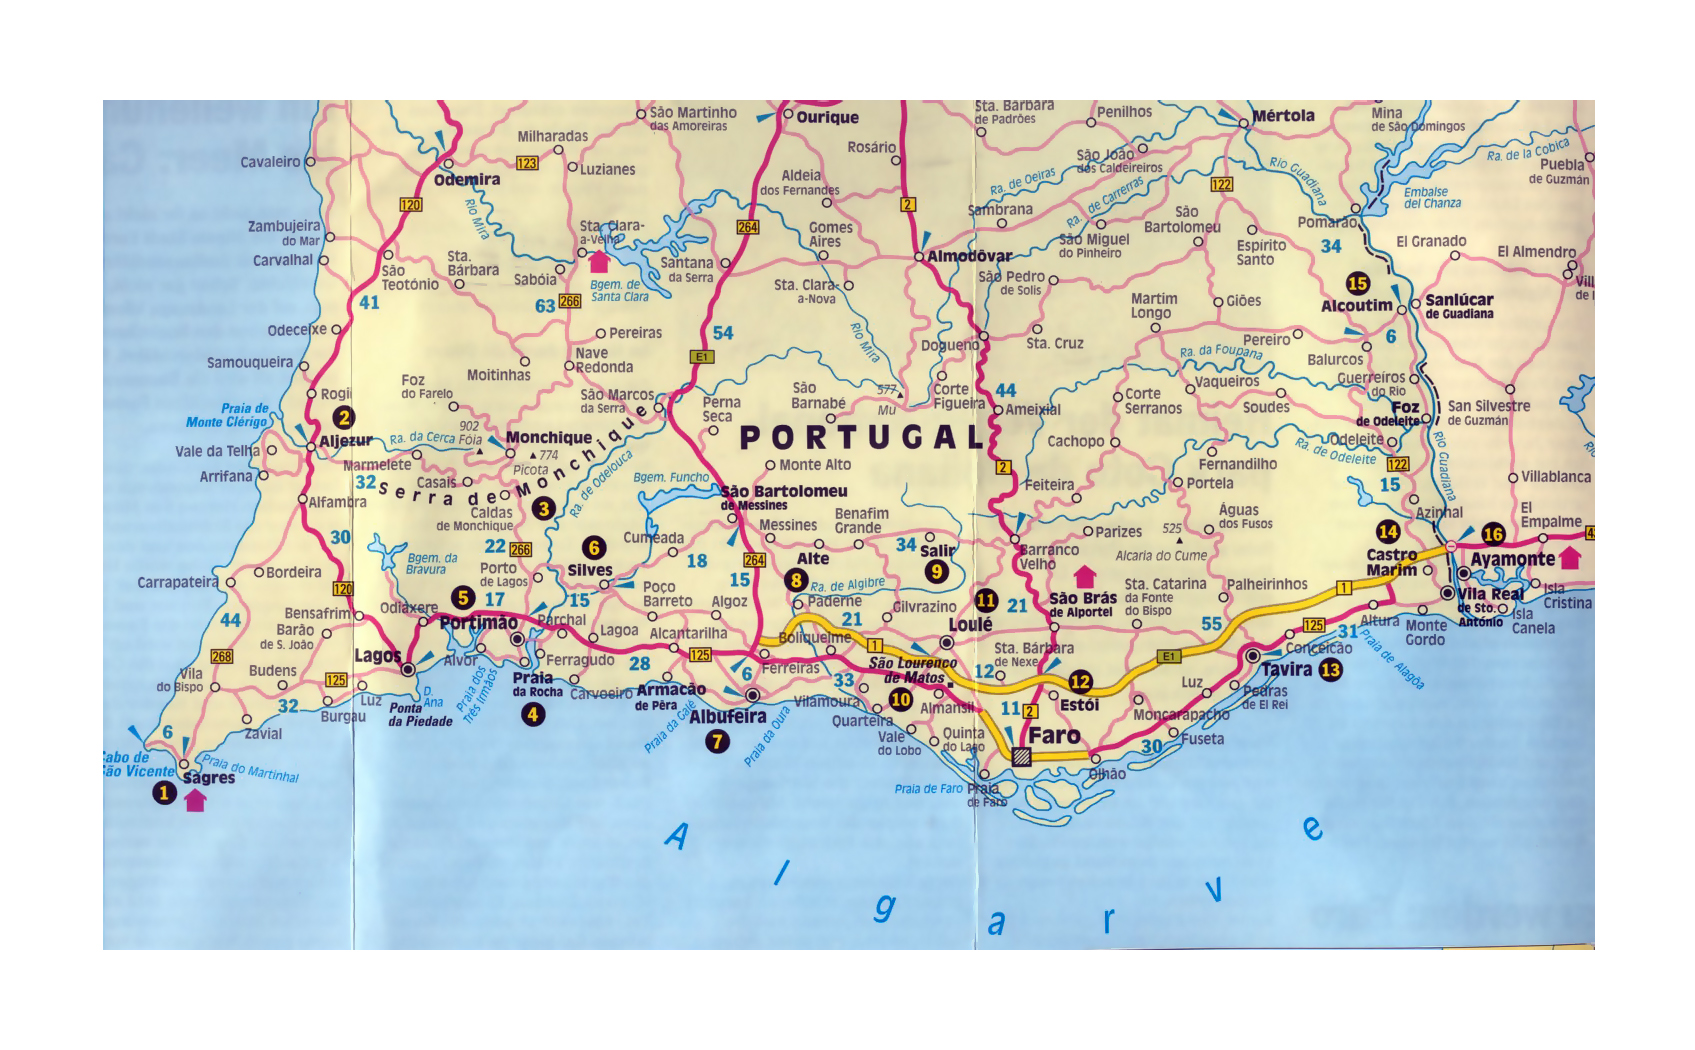 Detailed road map of Algarve with other marks | Algarve | Portugal